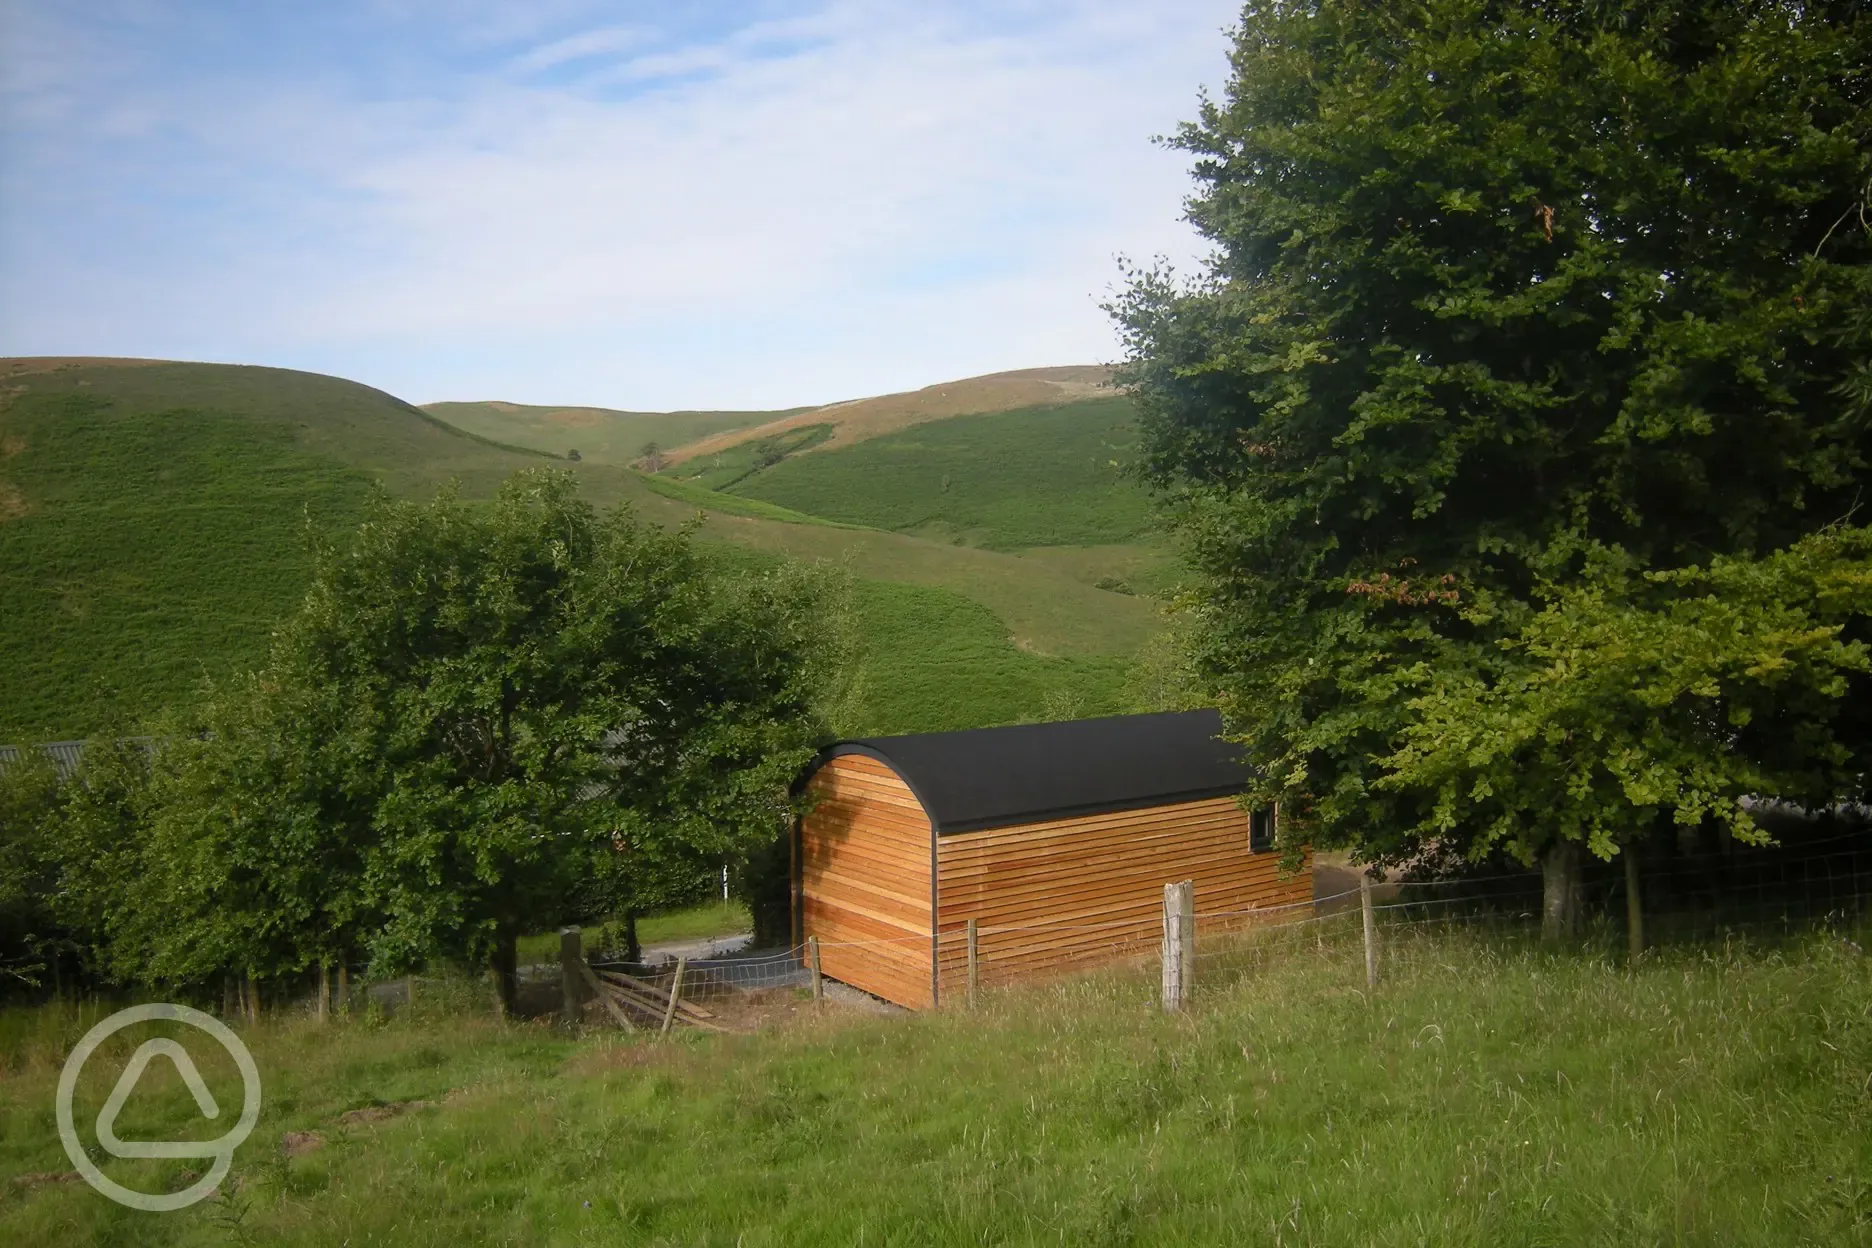 View of hills from above campsite, with shepherd's hut